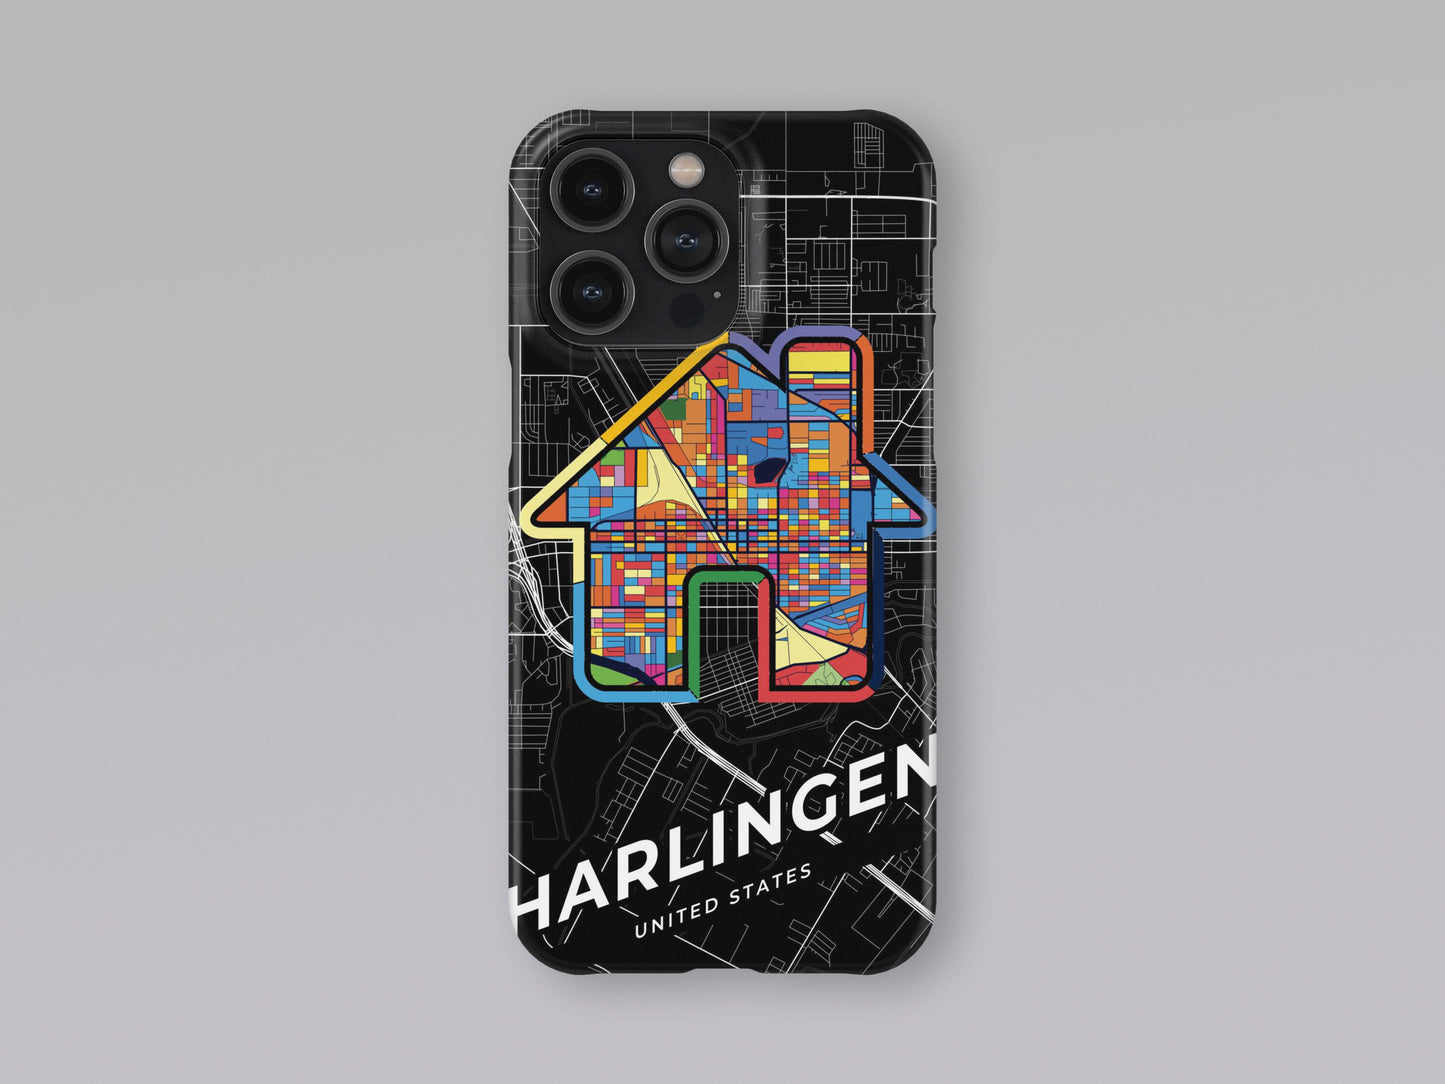 Harlingen Texas slim phone case with colorful icon. Birthday, wedding or housewarming gift. Couple match cases. 3